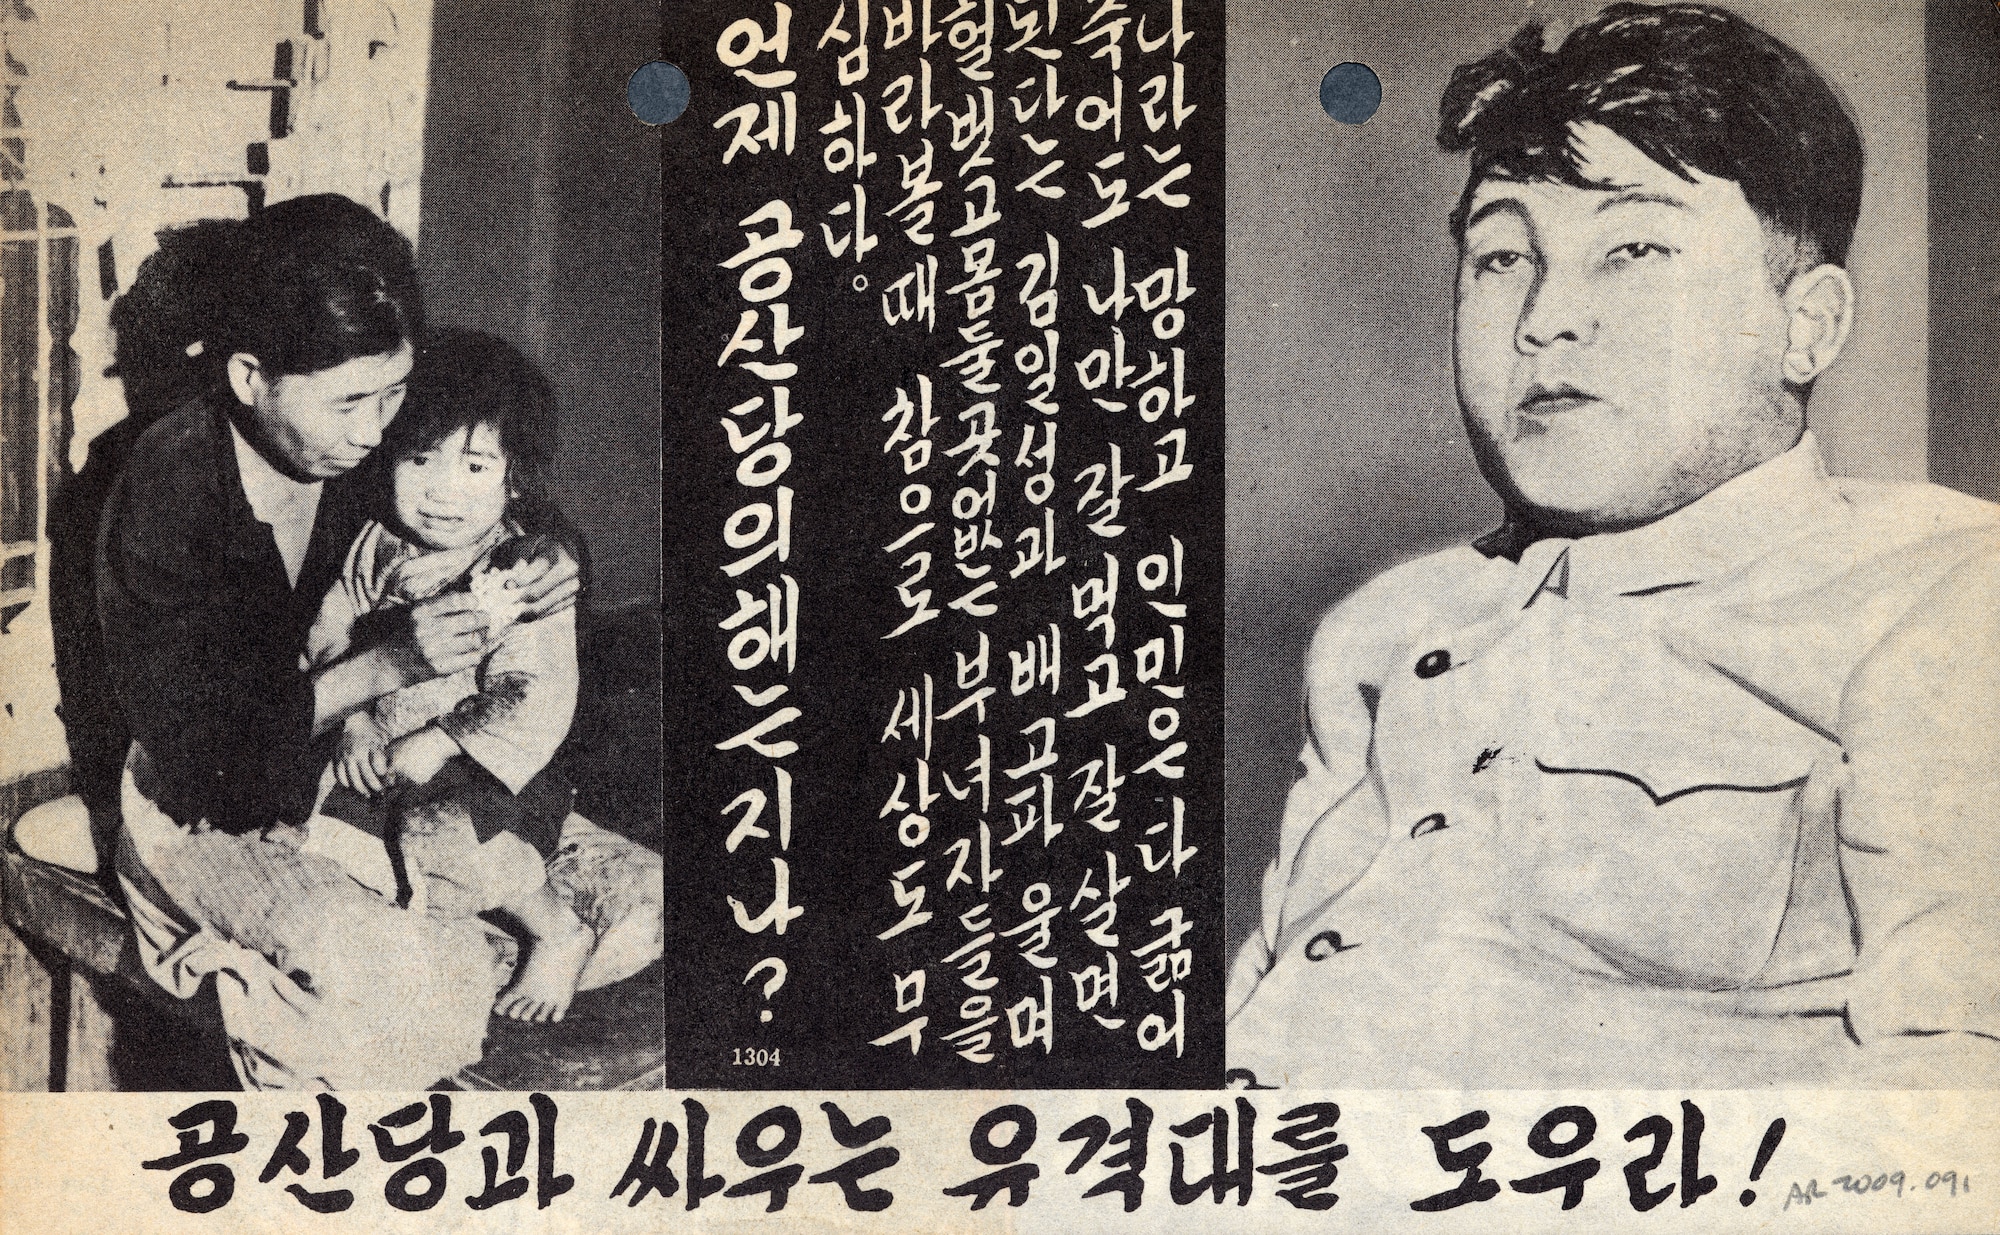 Written in Korean, this leaflet contrasted communist leaders’ luxury with the poverty of the average North Korean citizen. The front shows poor Koreans watching an extravagant party from outside a guarded building. The back (shown here) shows a poorly-clothed and starving mother and child compared to the well-fed leader of North Korea, Kim Il Sung. (U.S. Air Force photo)